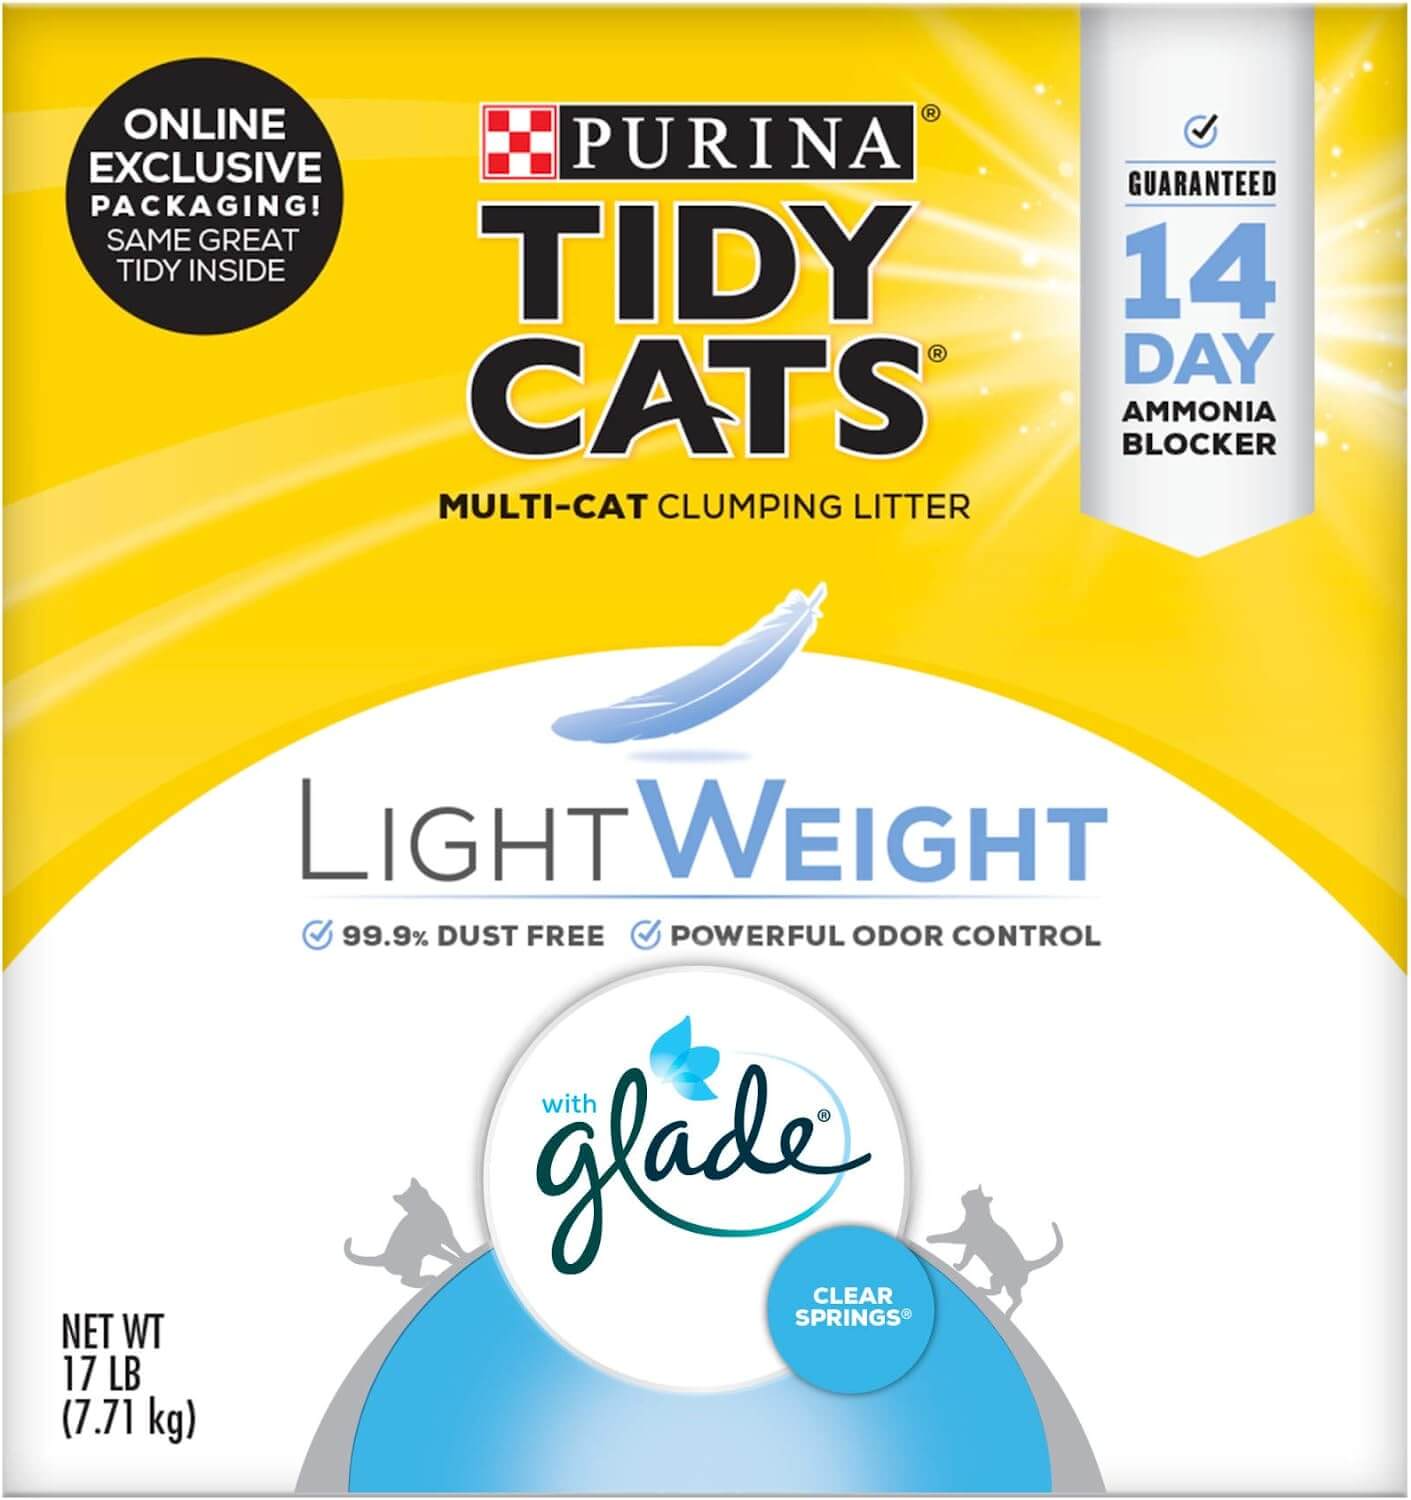 Purina Tidy Cats Low Dust Glade Clear Springs Multi-Cat Clumping Cat Litter